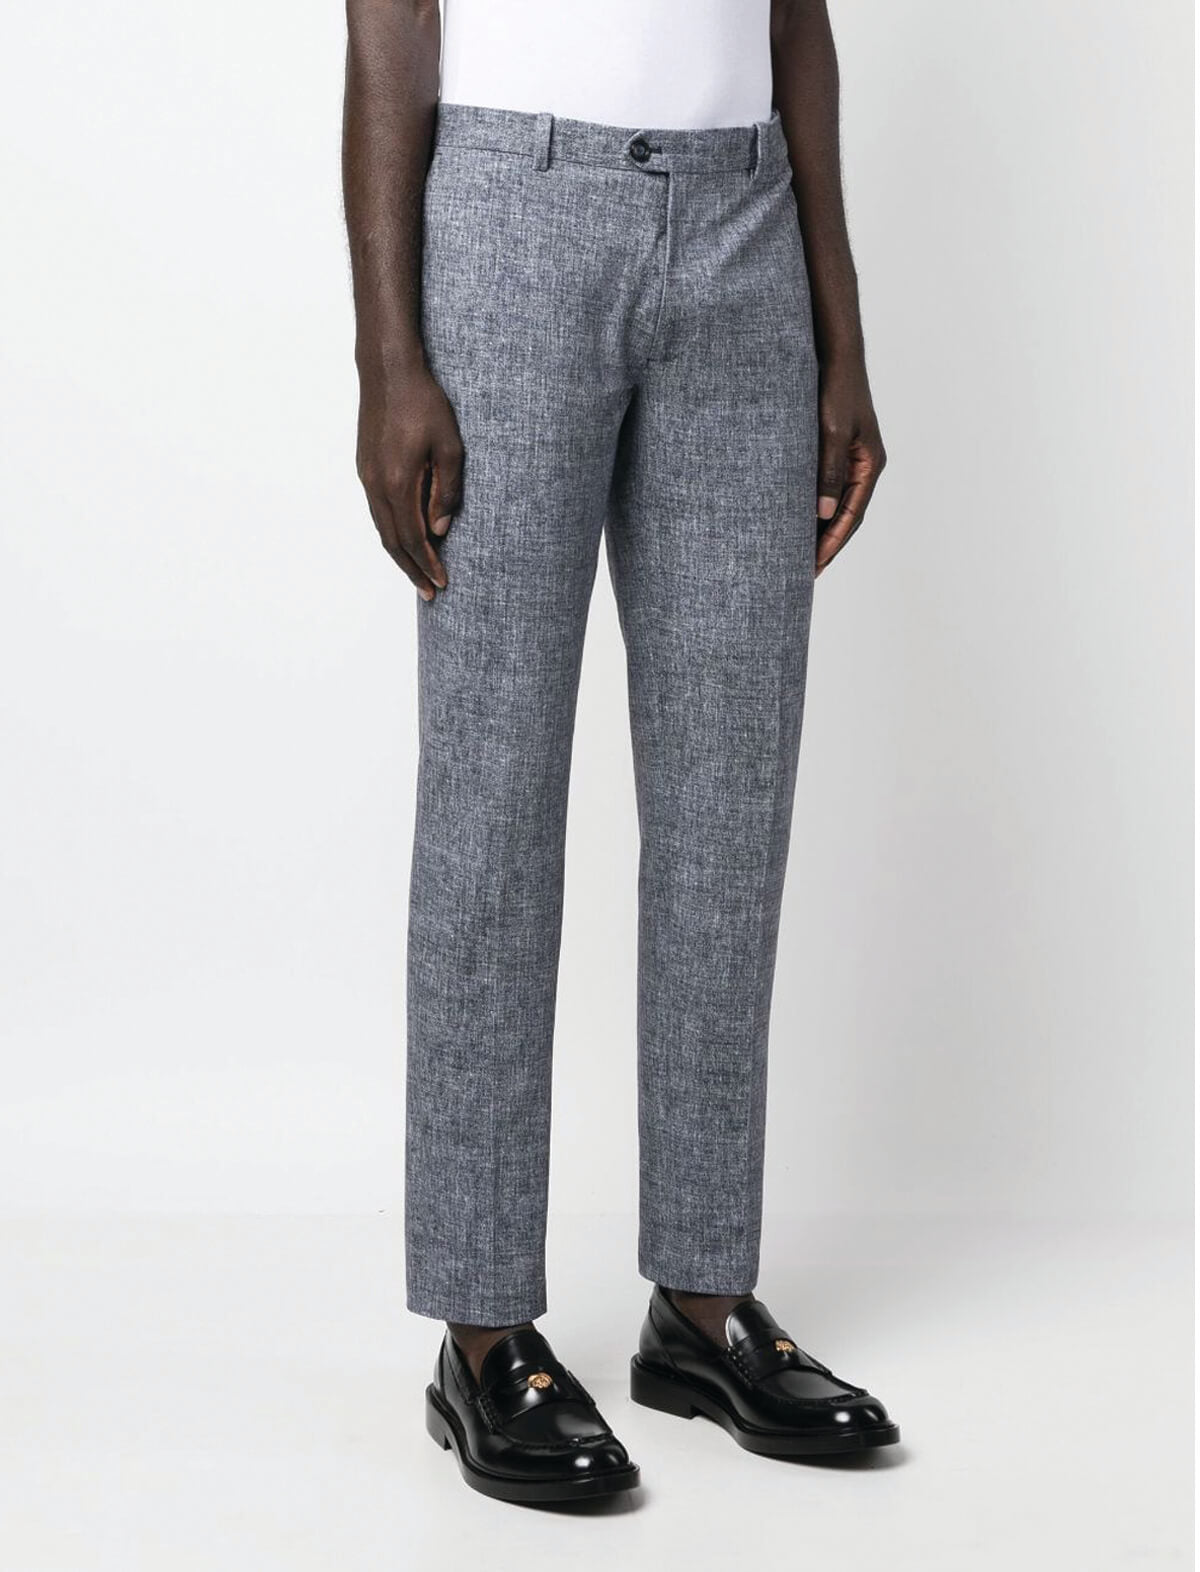 CIRCOLO 1901 Jersey Tailored Trousers in Blue Piquet